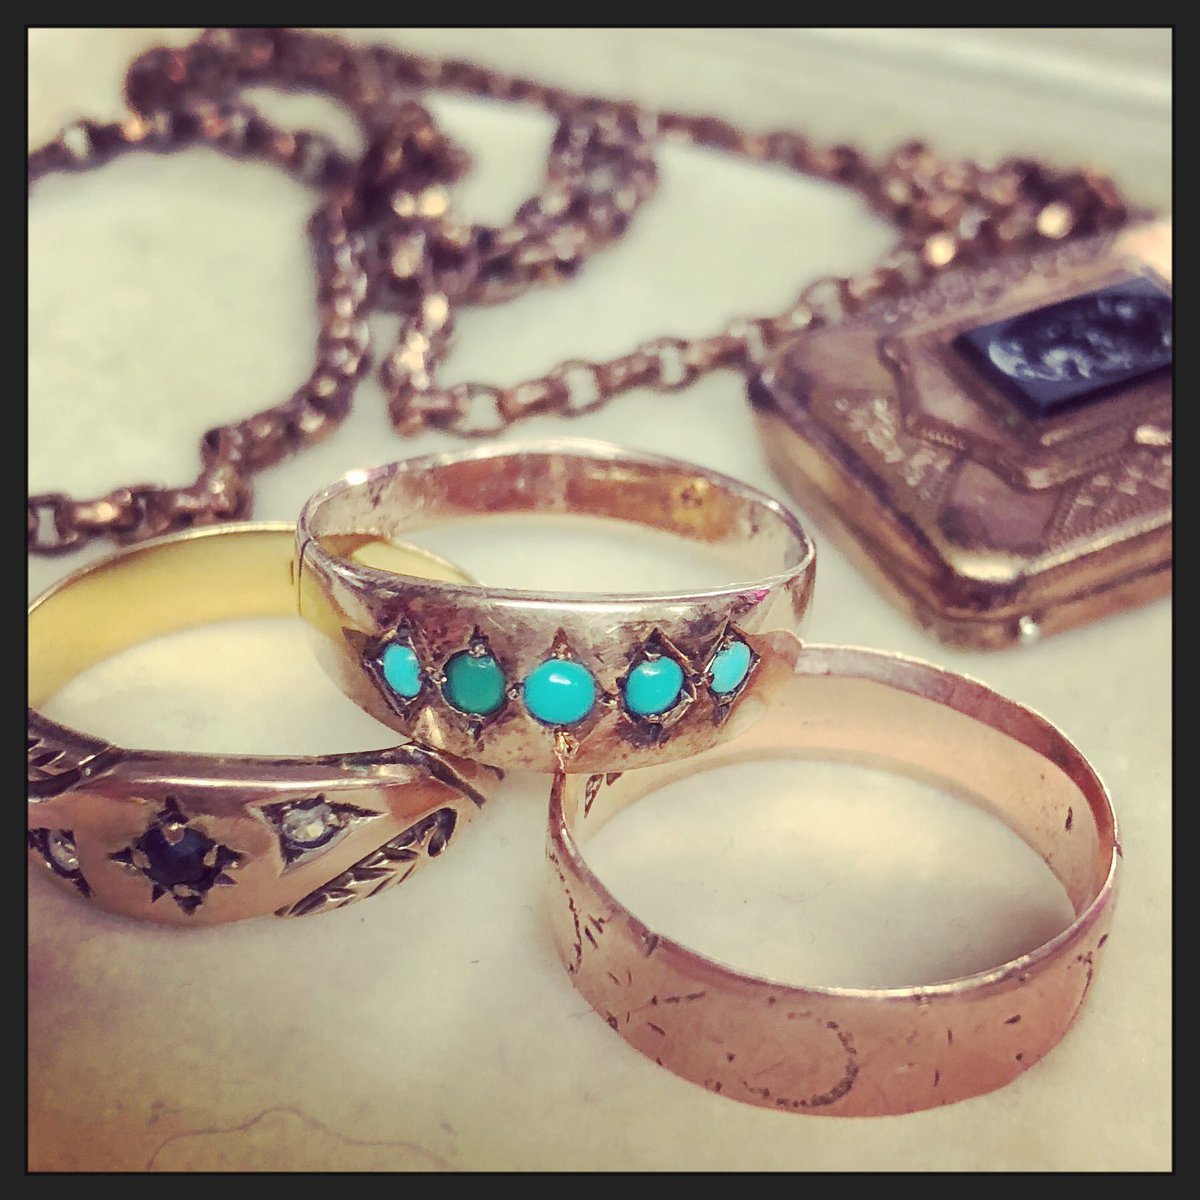 Lovely Victorian 9ct gold & 18ct gold rings that have arrived this week @ Melksham Arcade. #9ctgold #rosegold #victorian #jewellery #rings #18ct #gypsyring #diamonds #turquoise #weddingband #sapphire #victorianrings #victorianjewellery #antiquejewellery #boxchain #locket